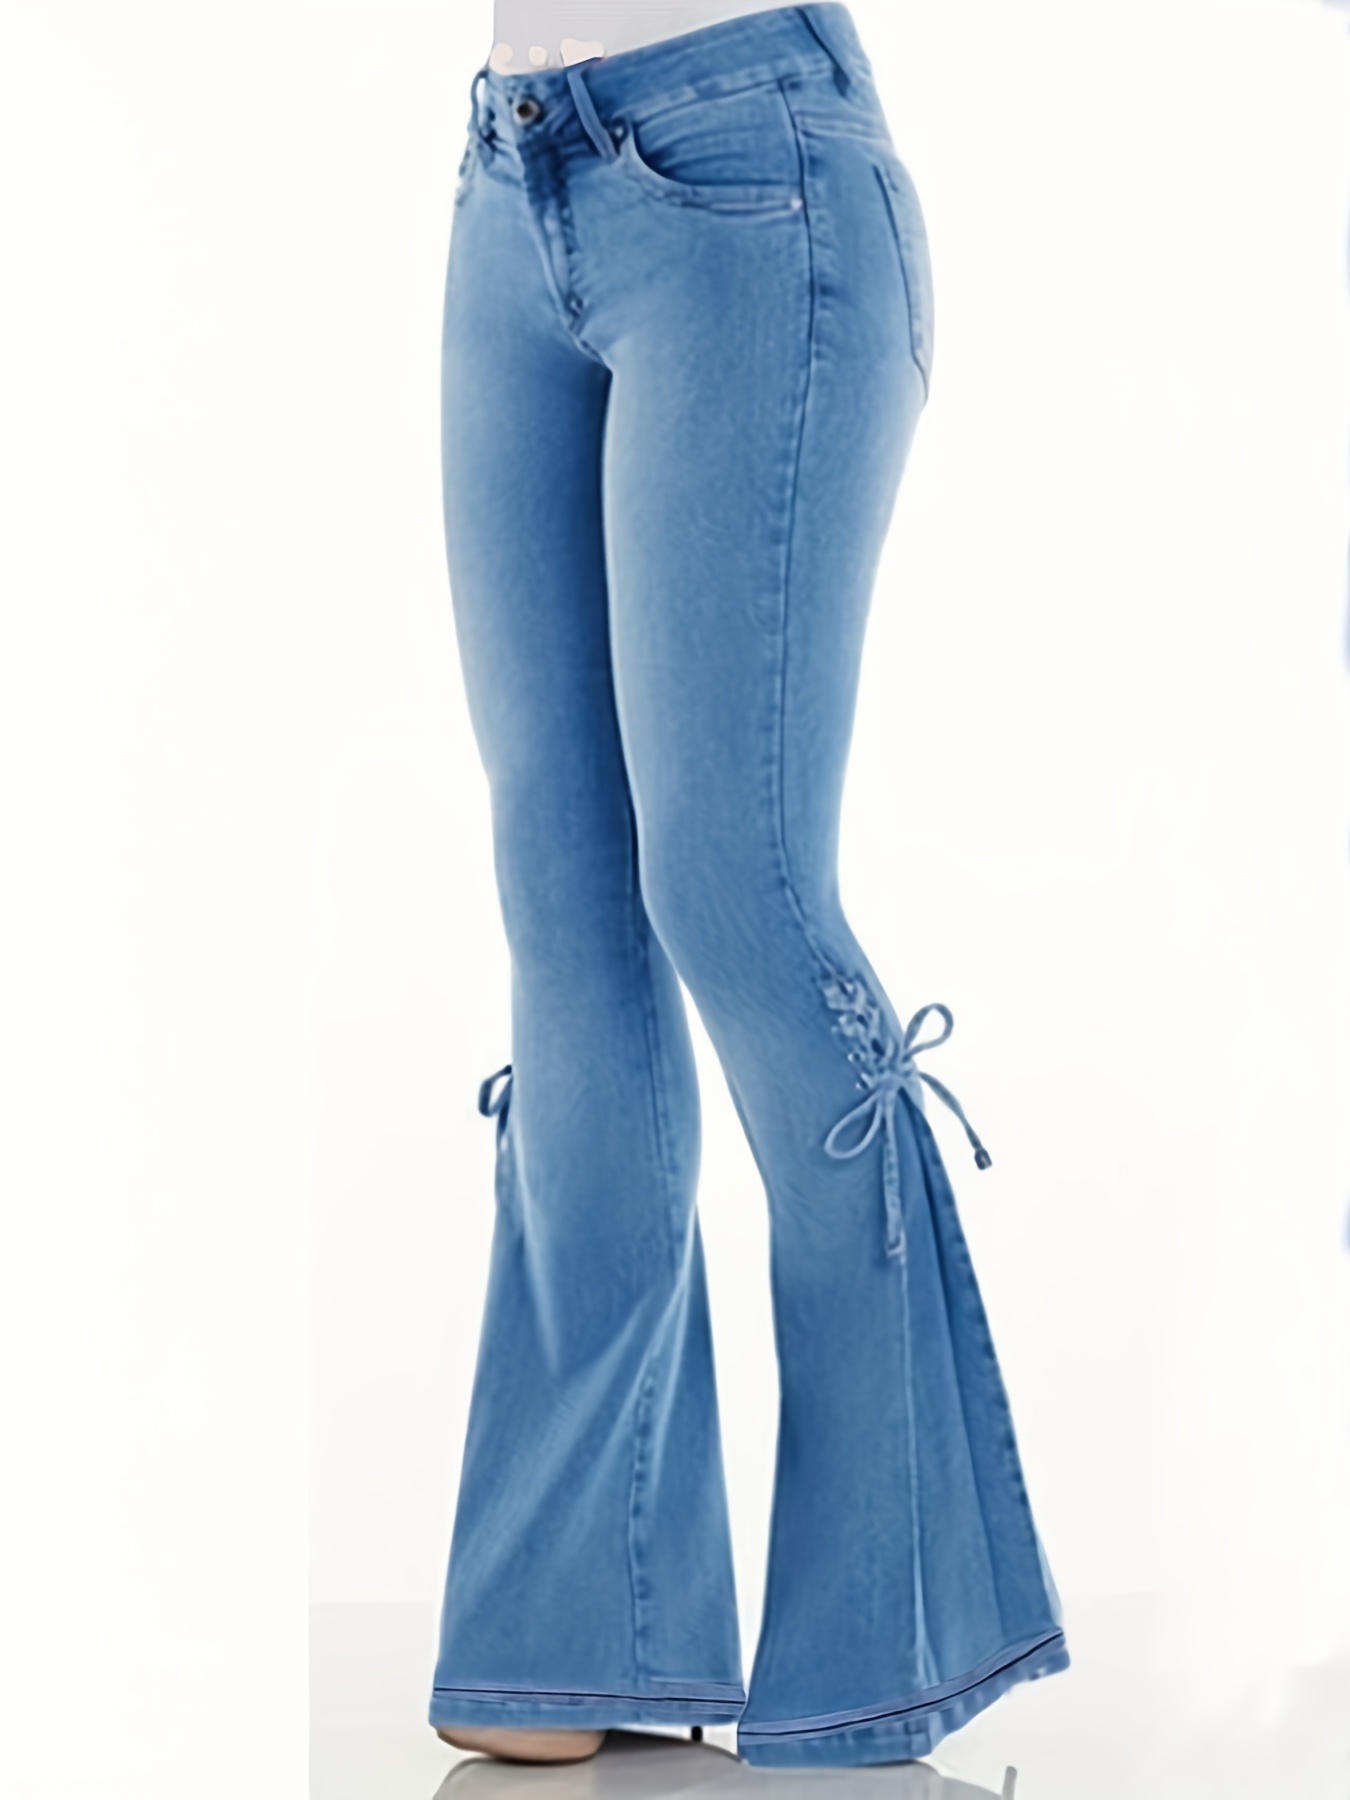 High-rise Bell-bottom Jeans, Semi-stretch High Waist Boot-cut Flared Jeans,  Every Day Stylish Pants, Women's Clothing & Denim